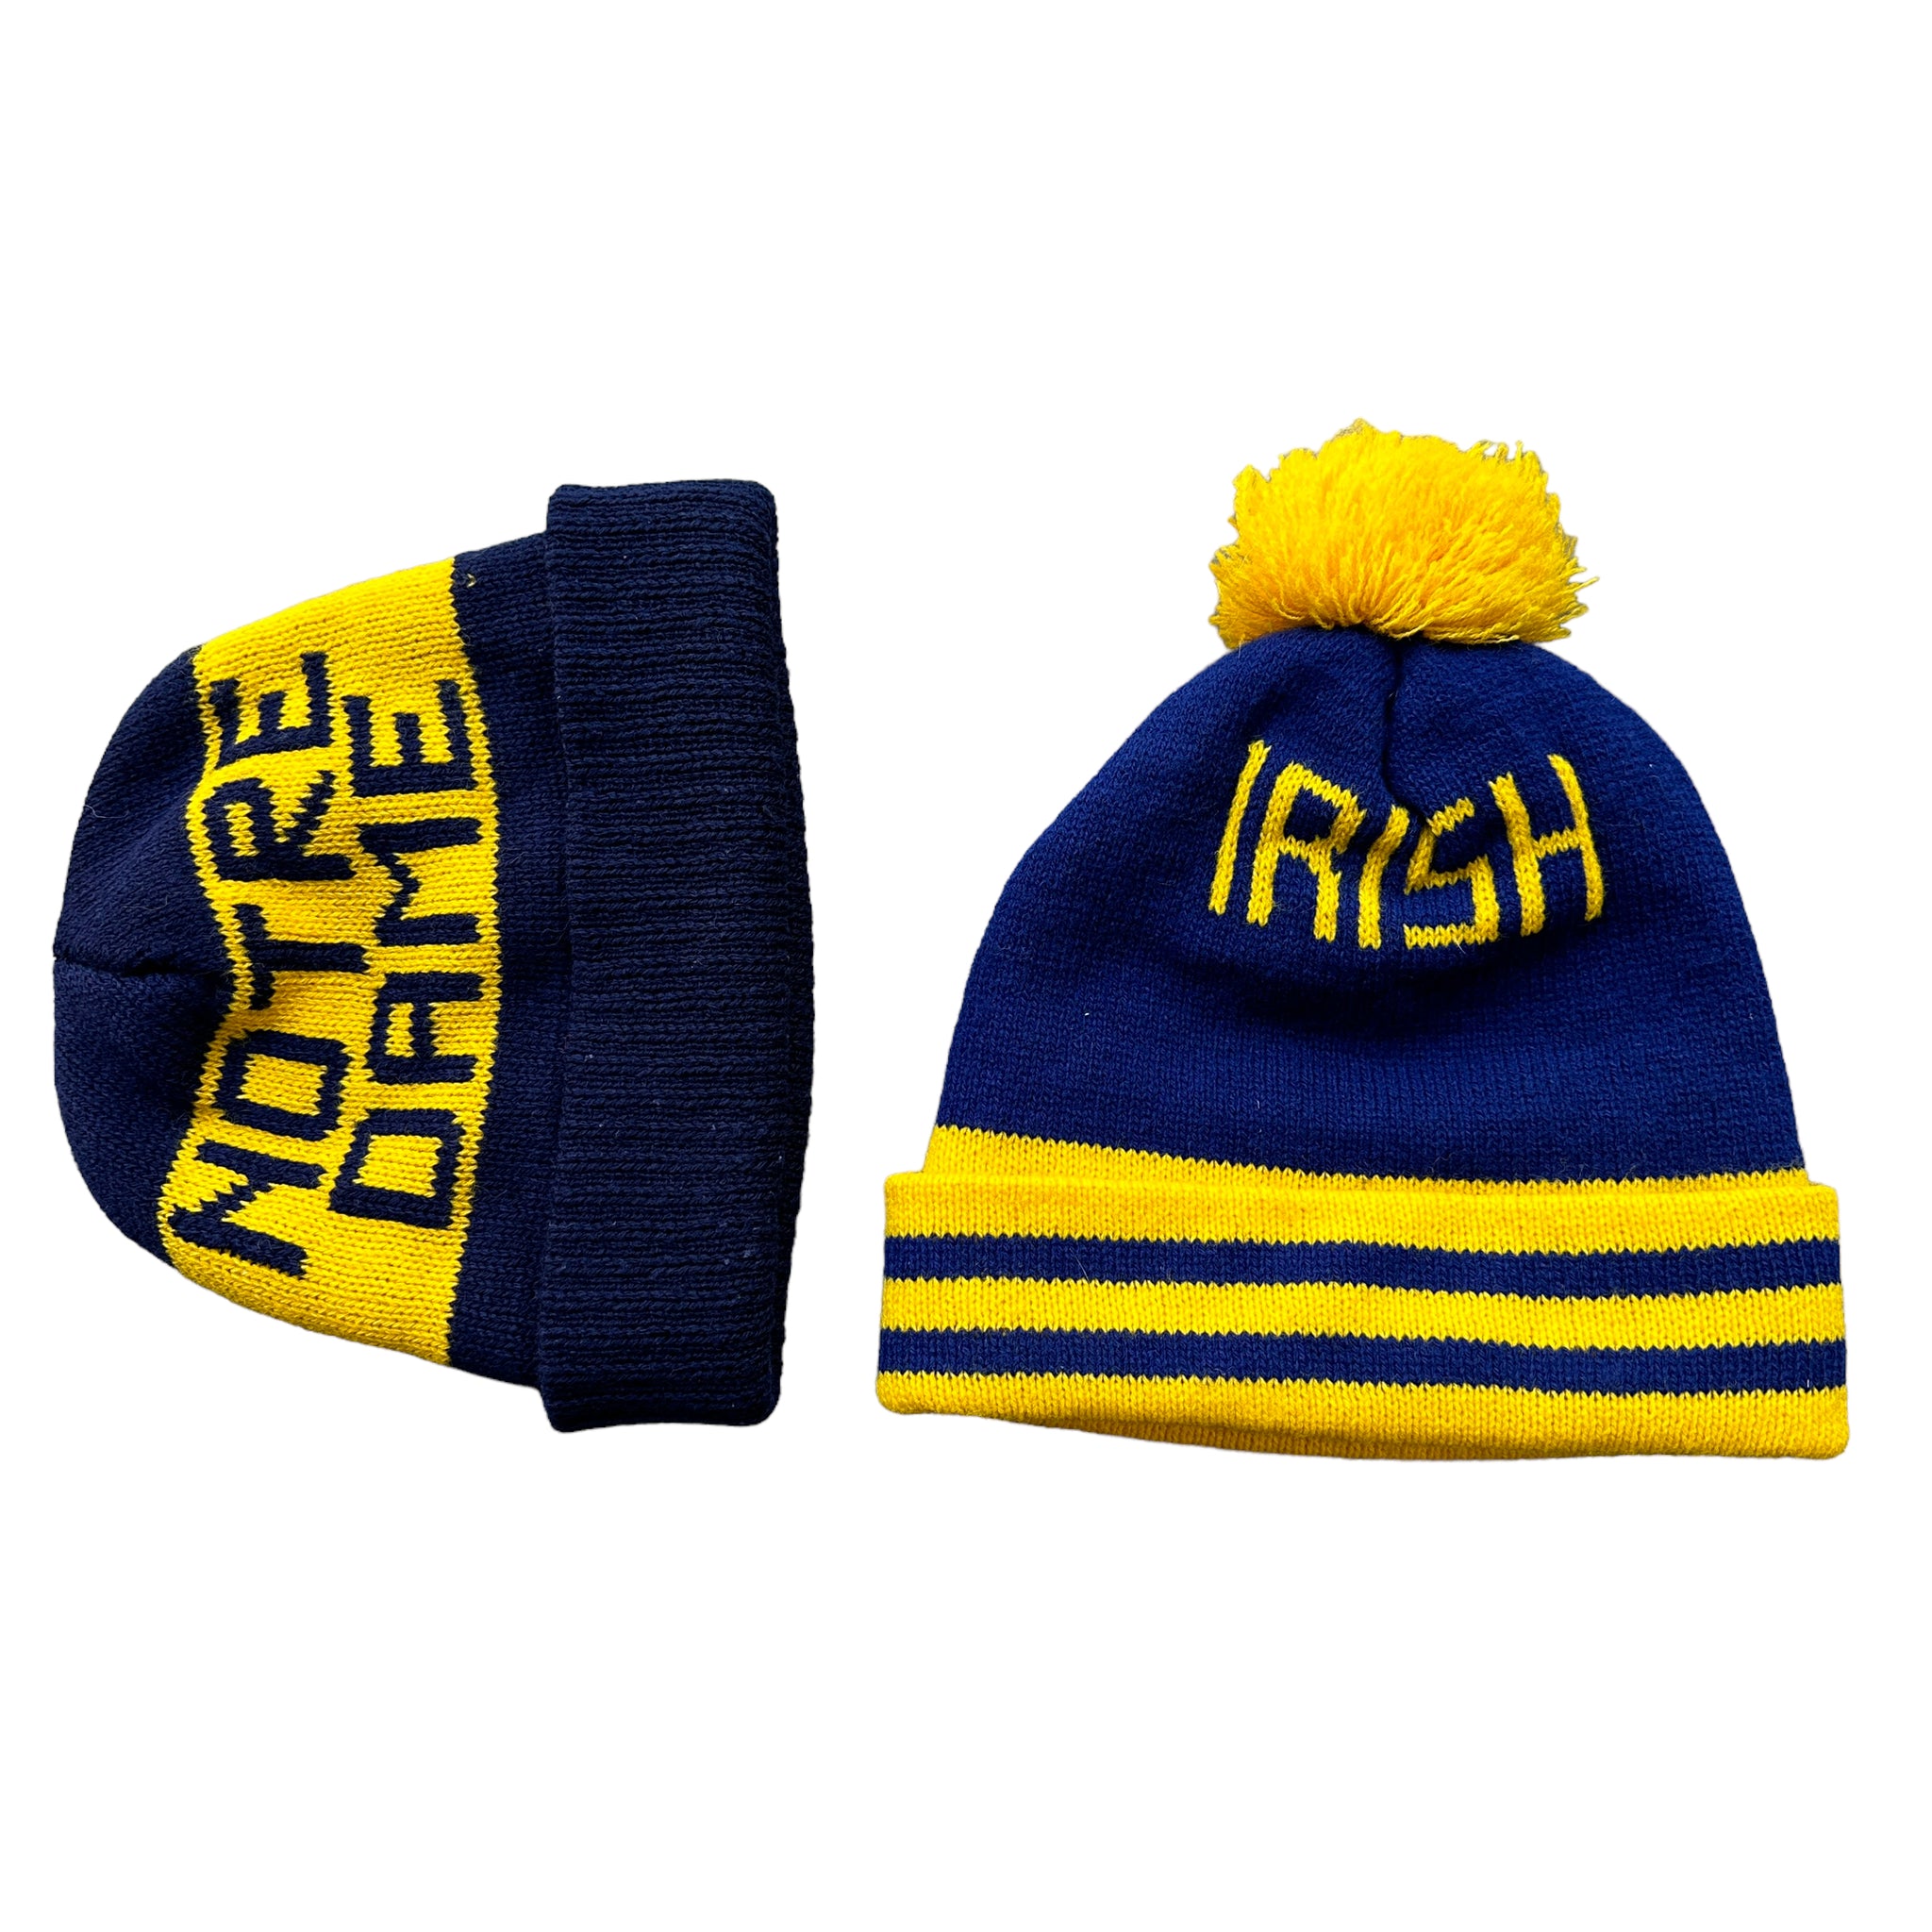 Notre dame beanies